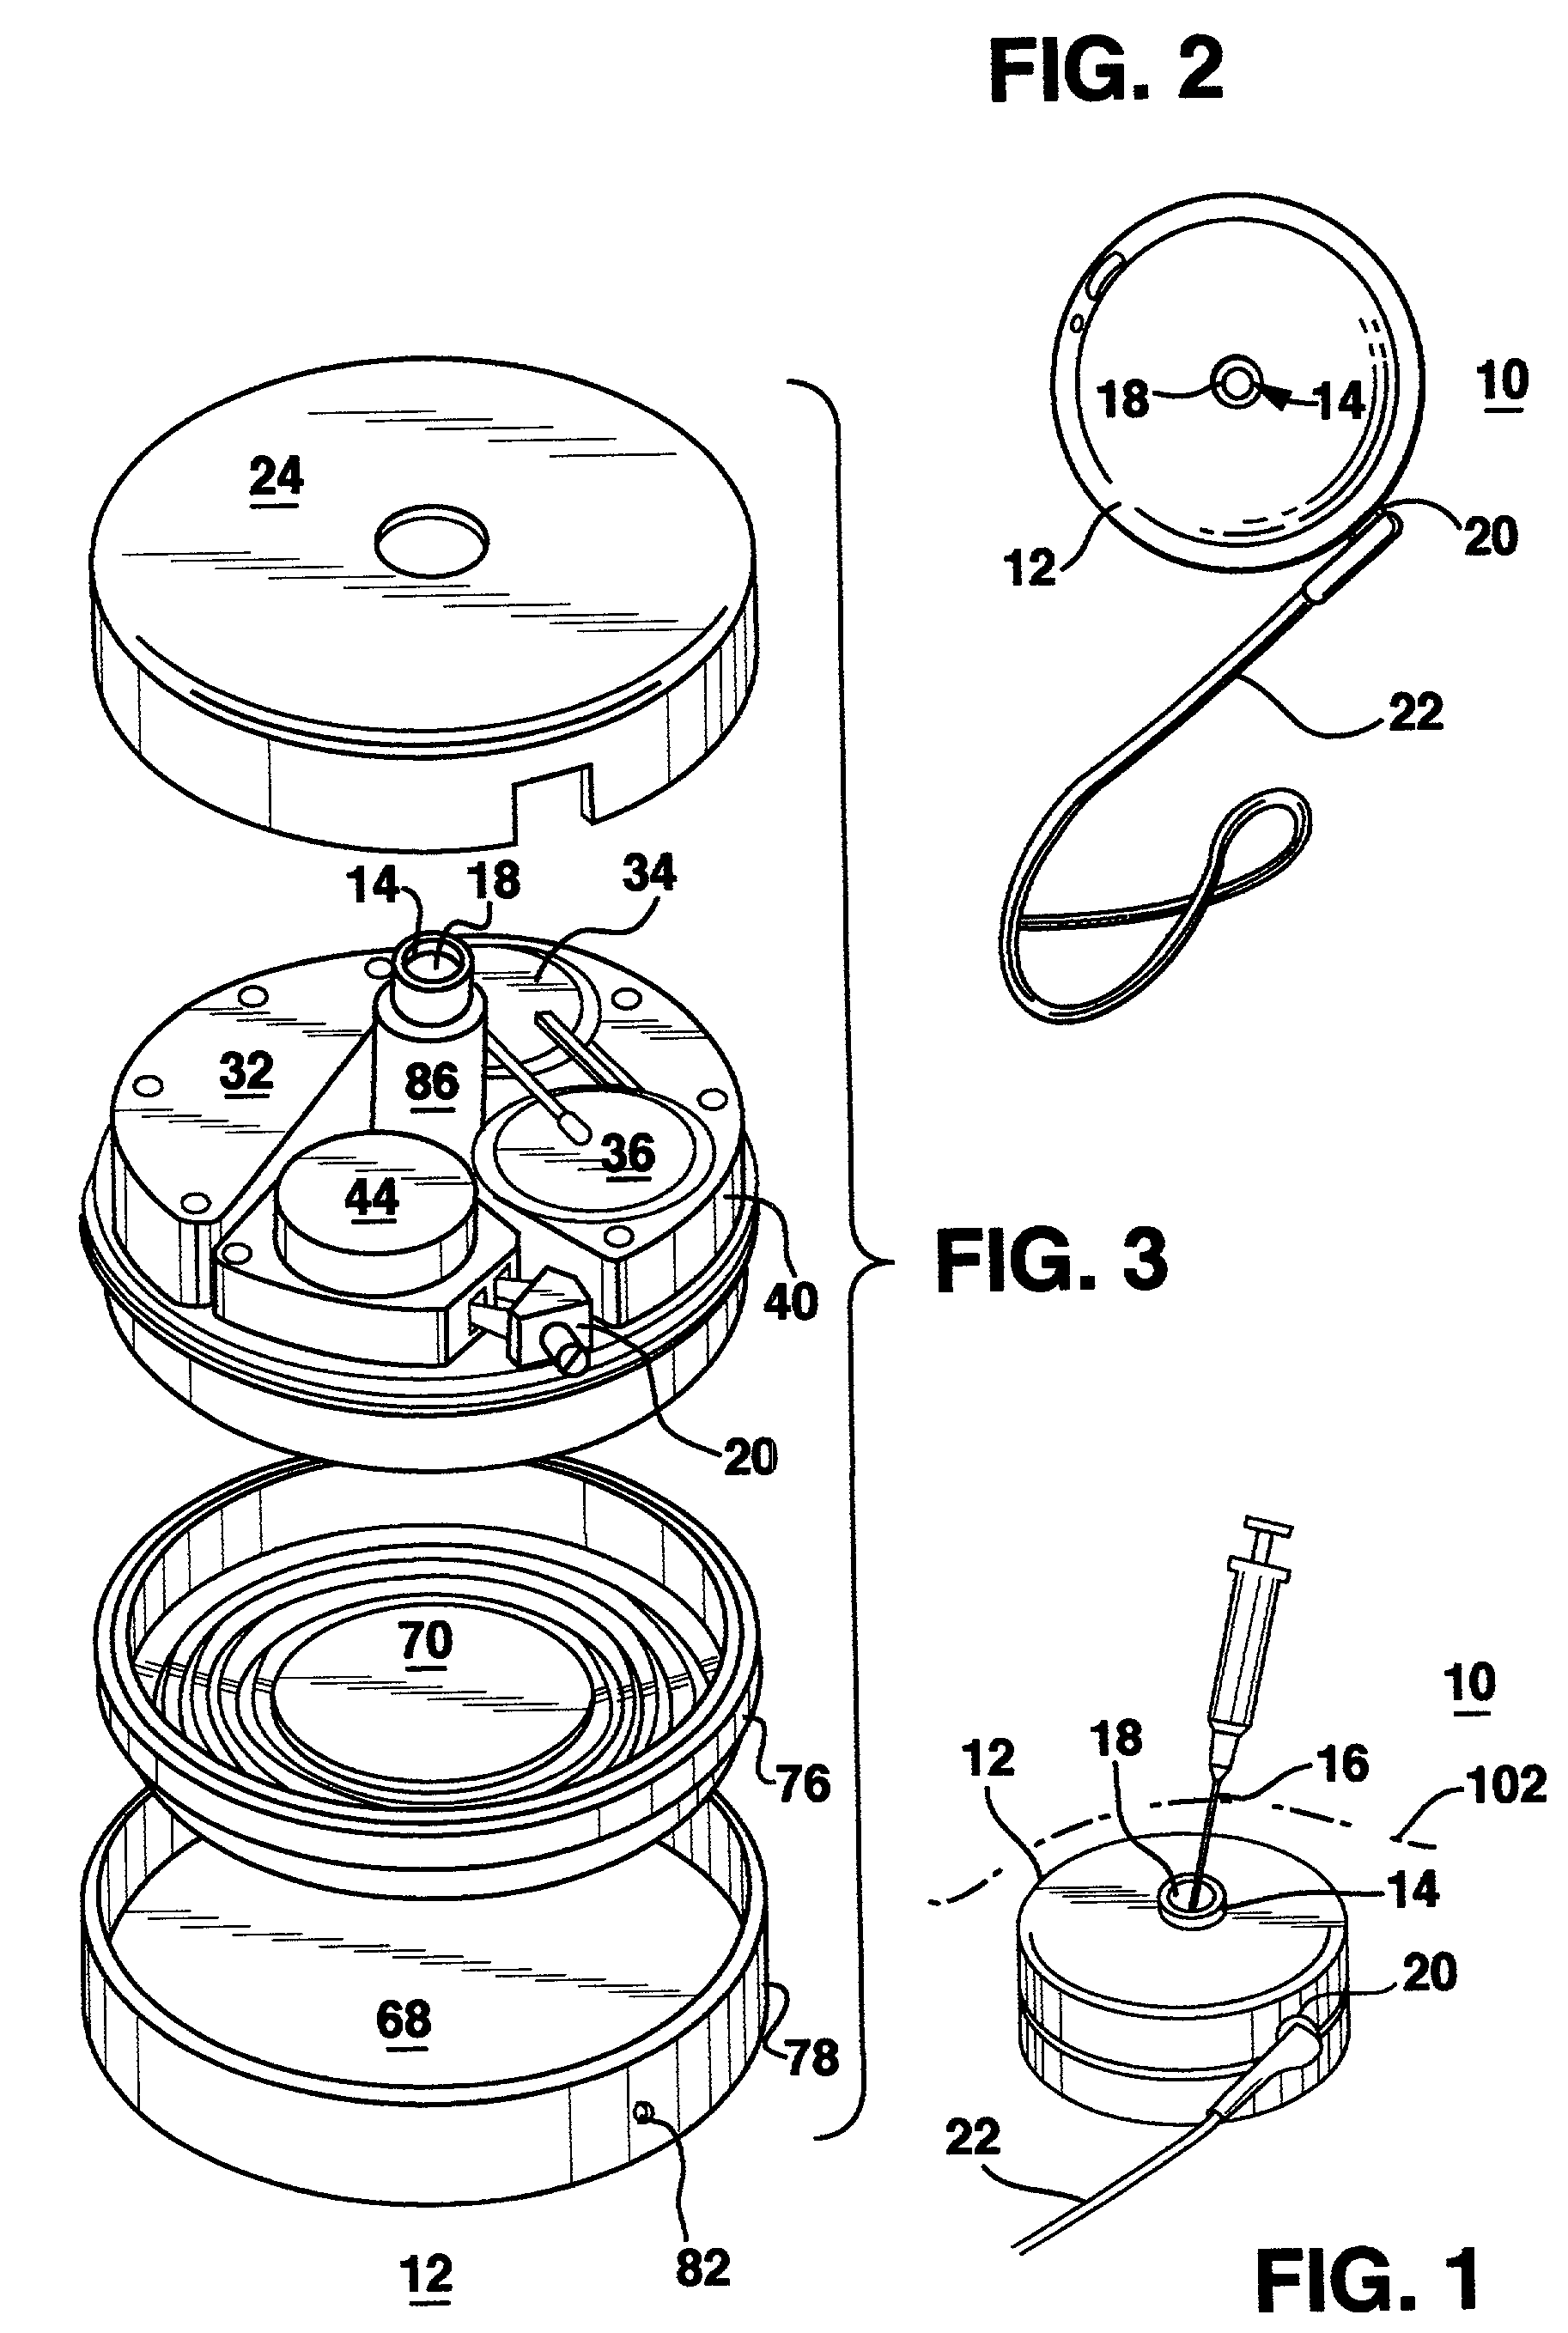 Methods and apparatus for delivering a drug influencing appetite for treatment of eating disorders